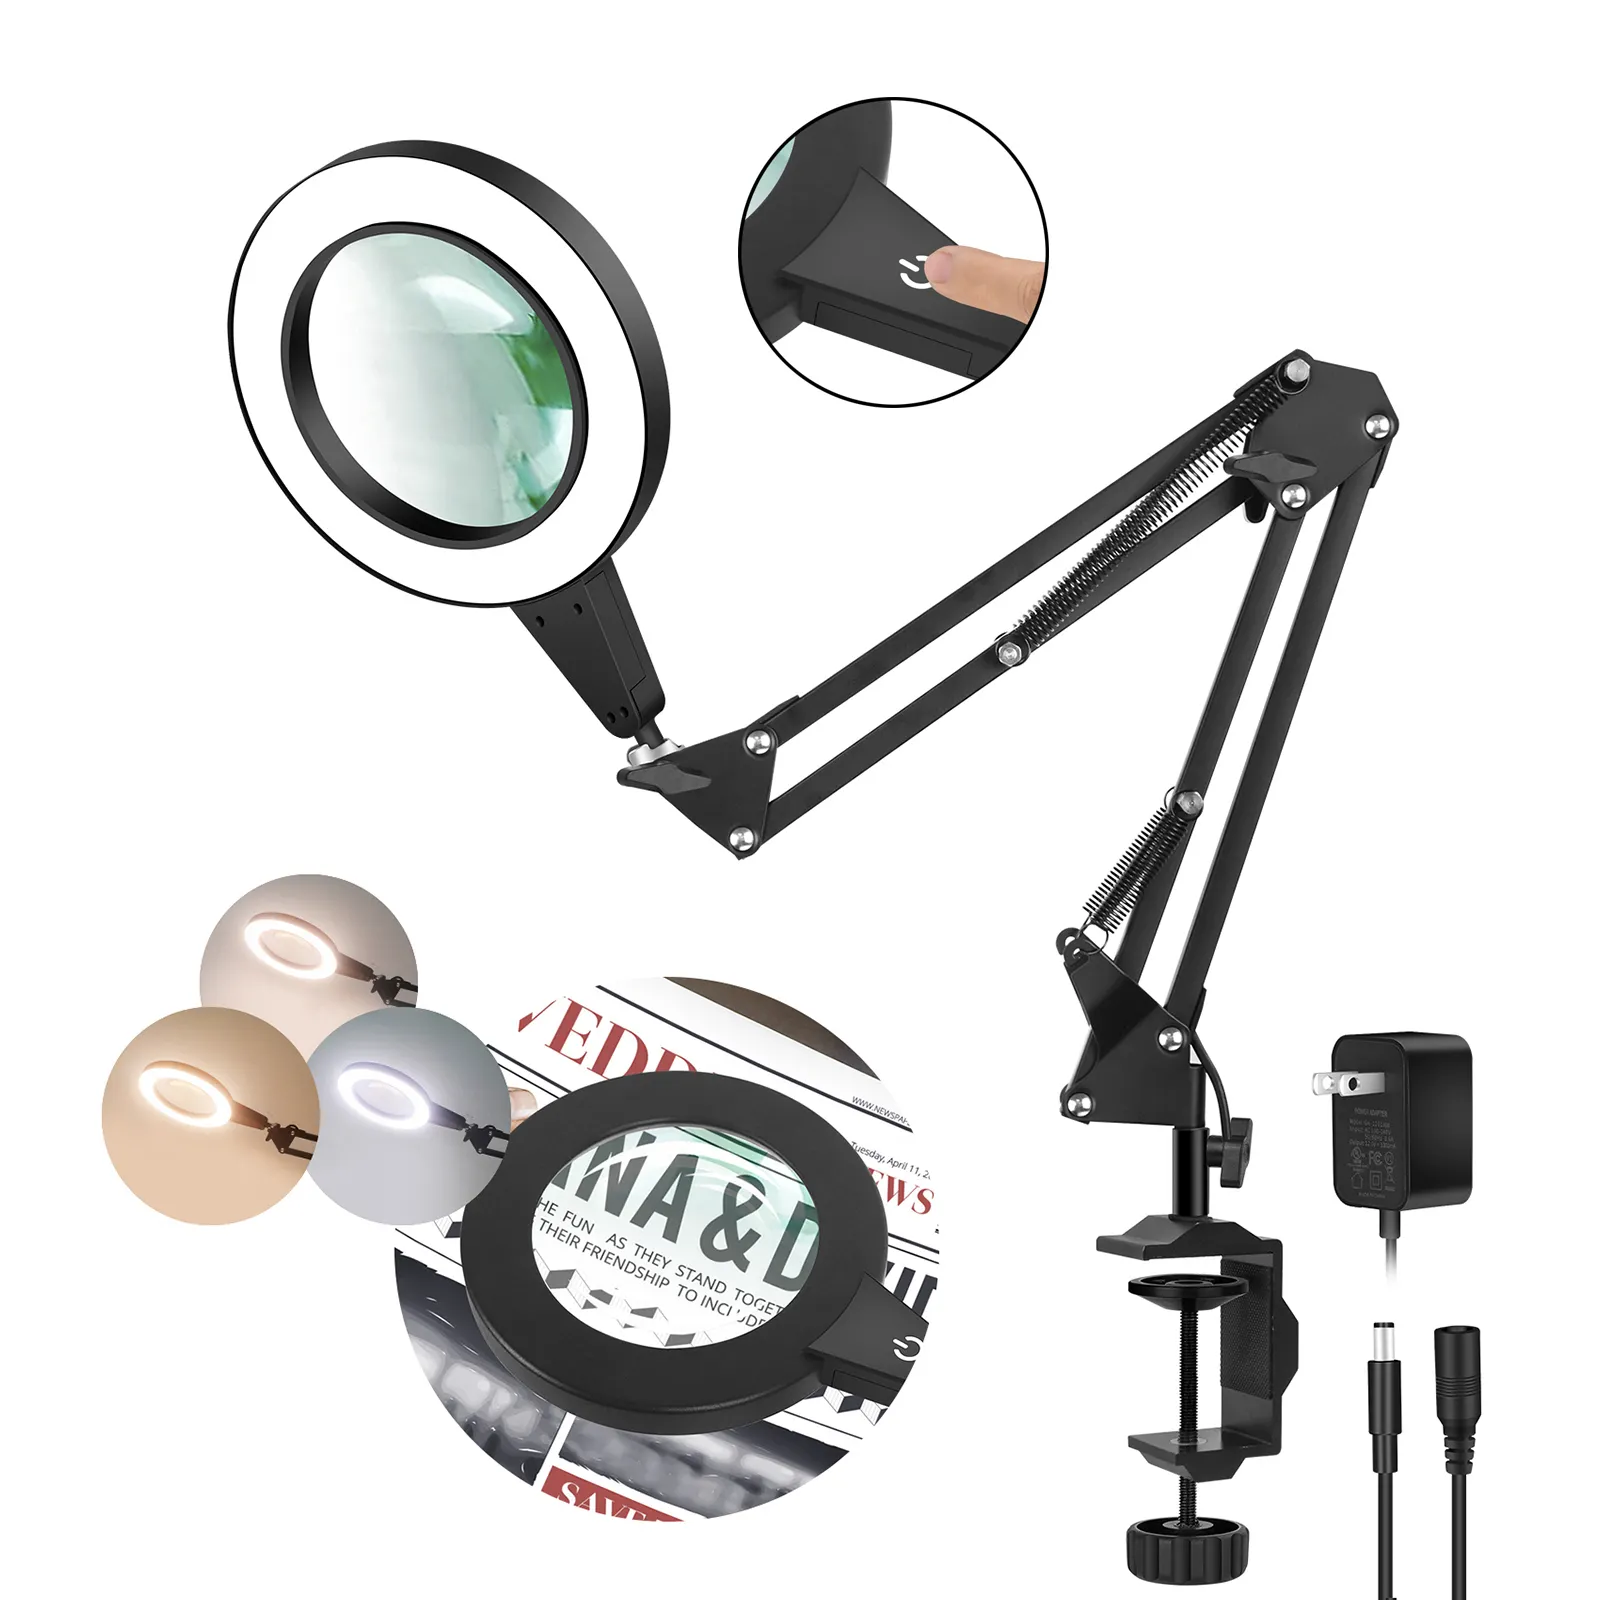 12V LED Desk Lamp Table Touch Control 5X Magnifier Clip Folding Reading Beauty Magnifying Glass LightingためCrafts Workbench